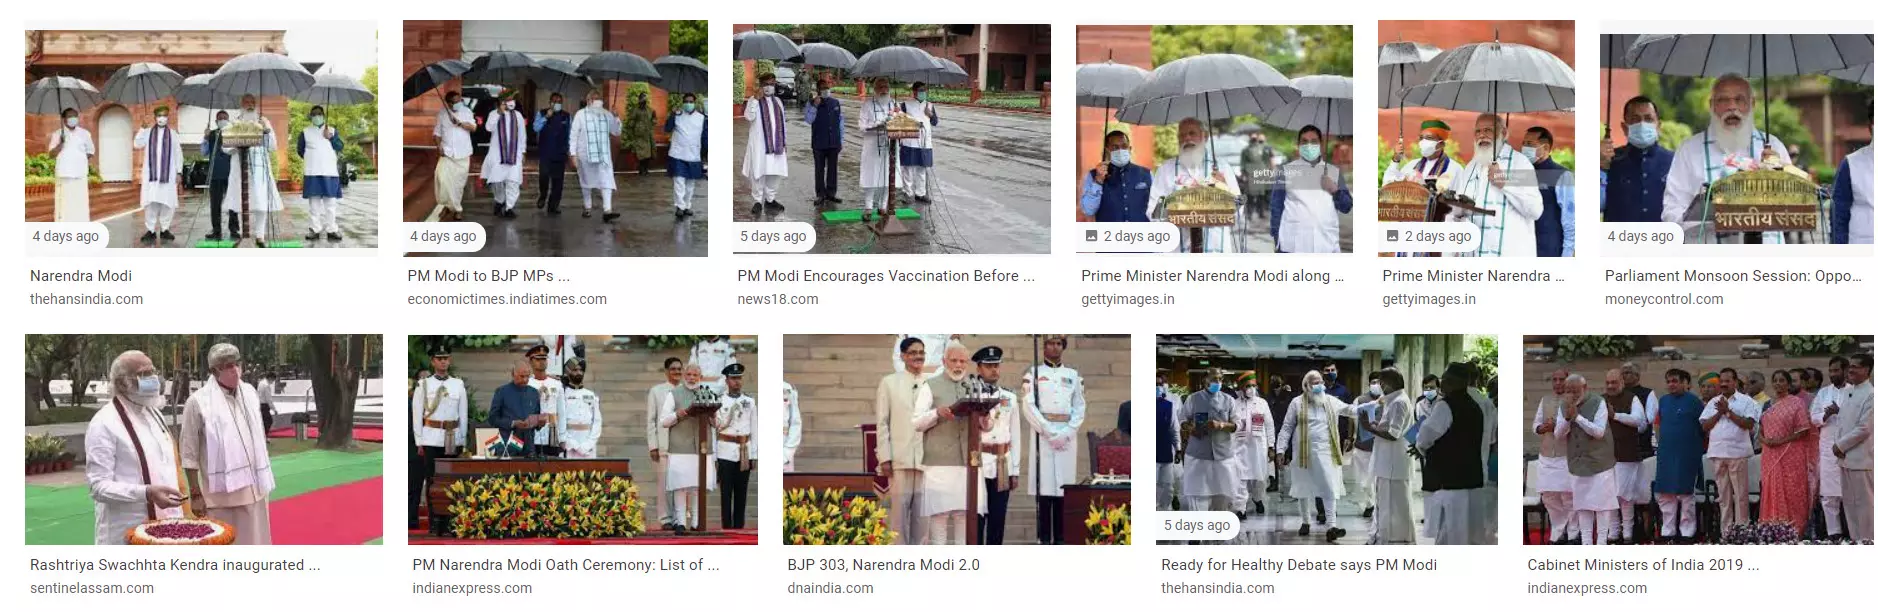 Fact Check: Morphed Image Viral To Show PM Modi Carrying An Umbrella With  Jio Logo